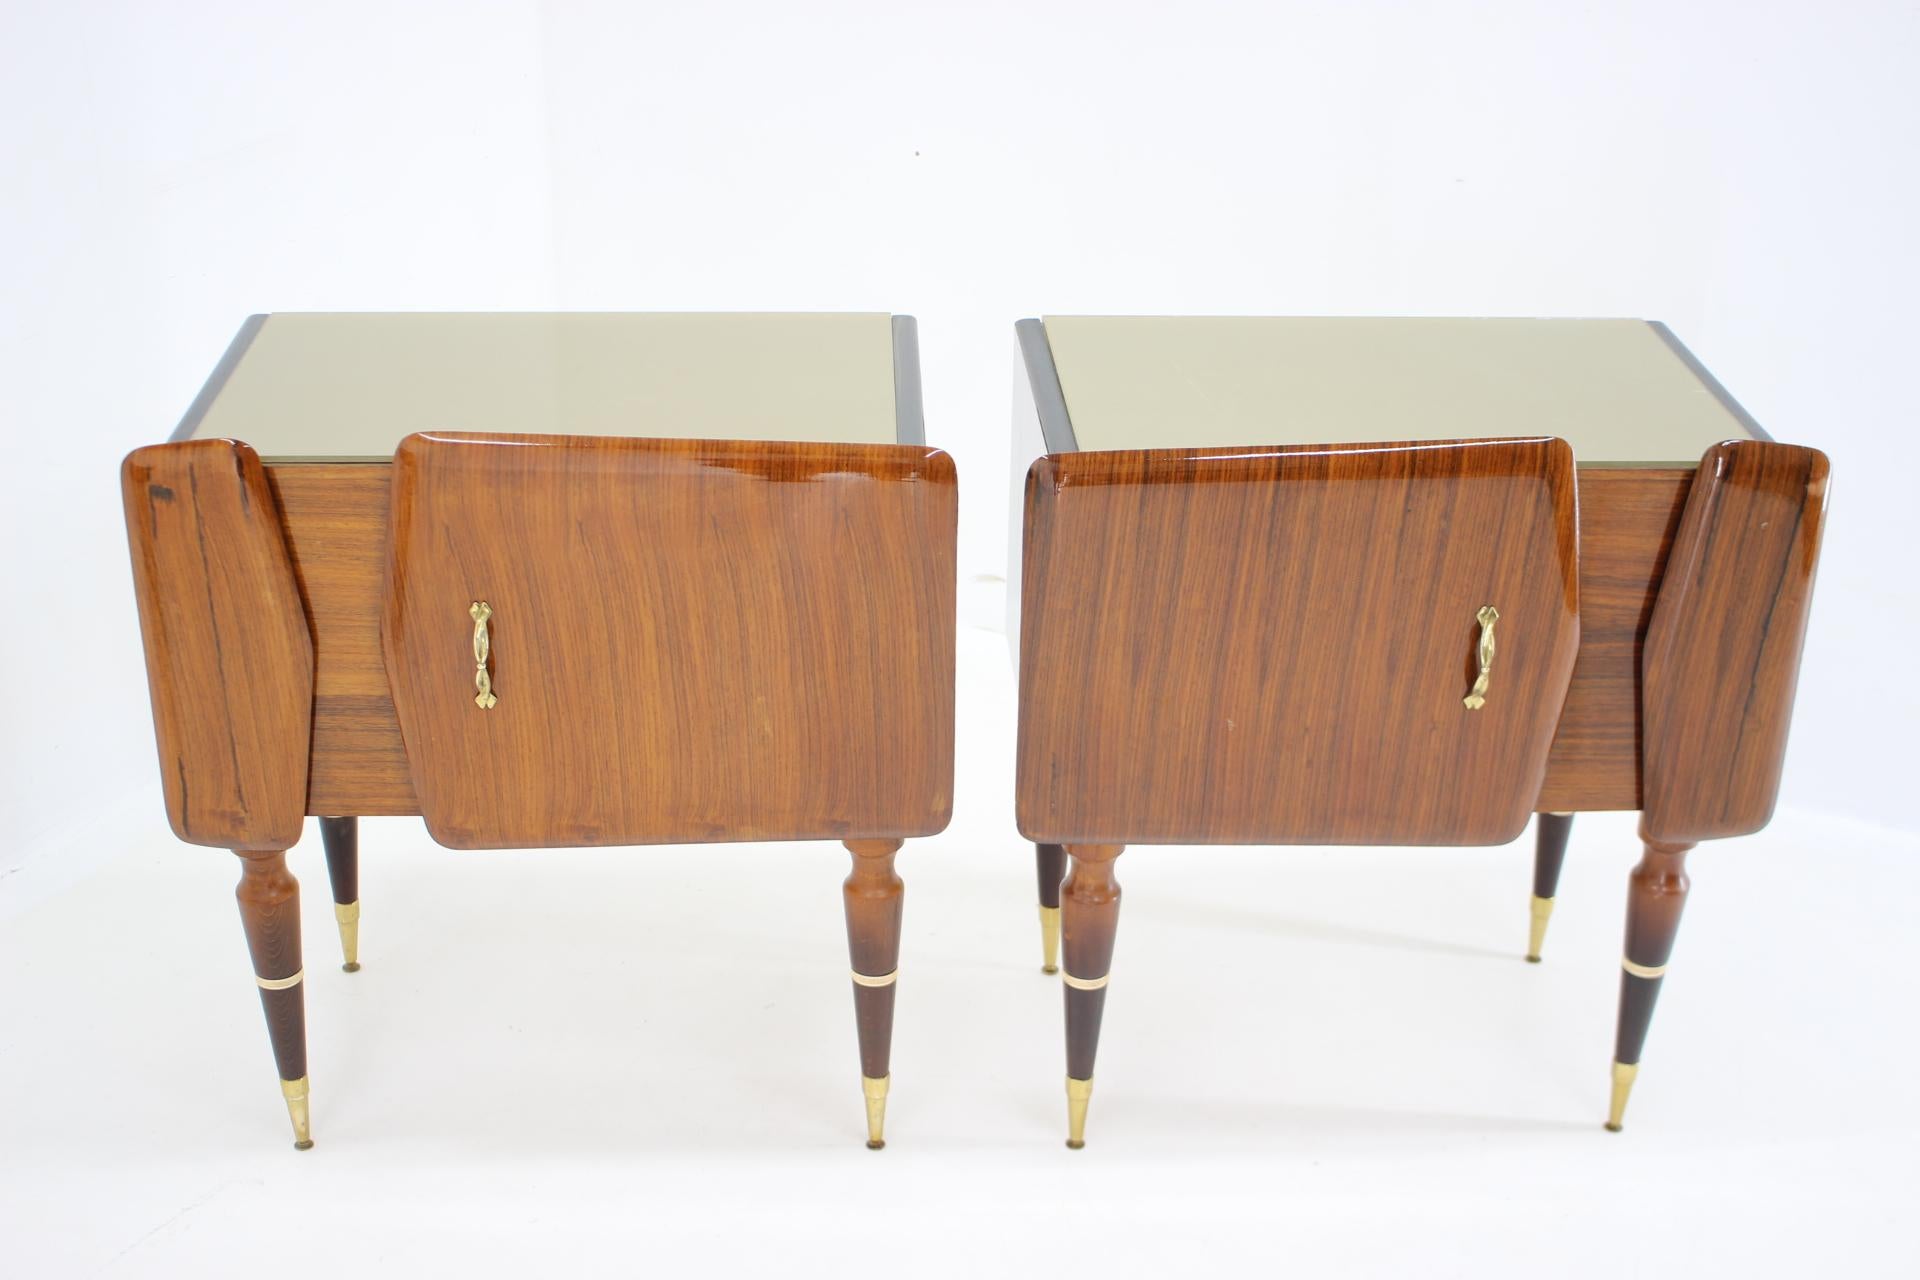 1960s Set of Sculptural Wooden Bedside Tables and Sideboard, Italy For Sale 1